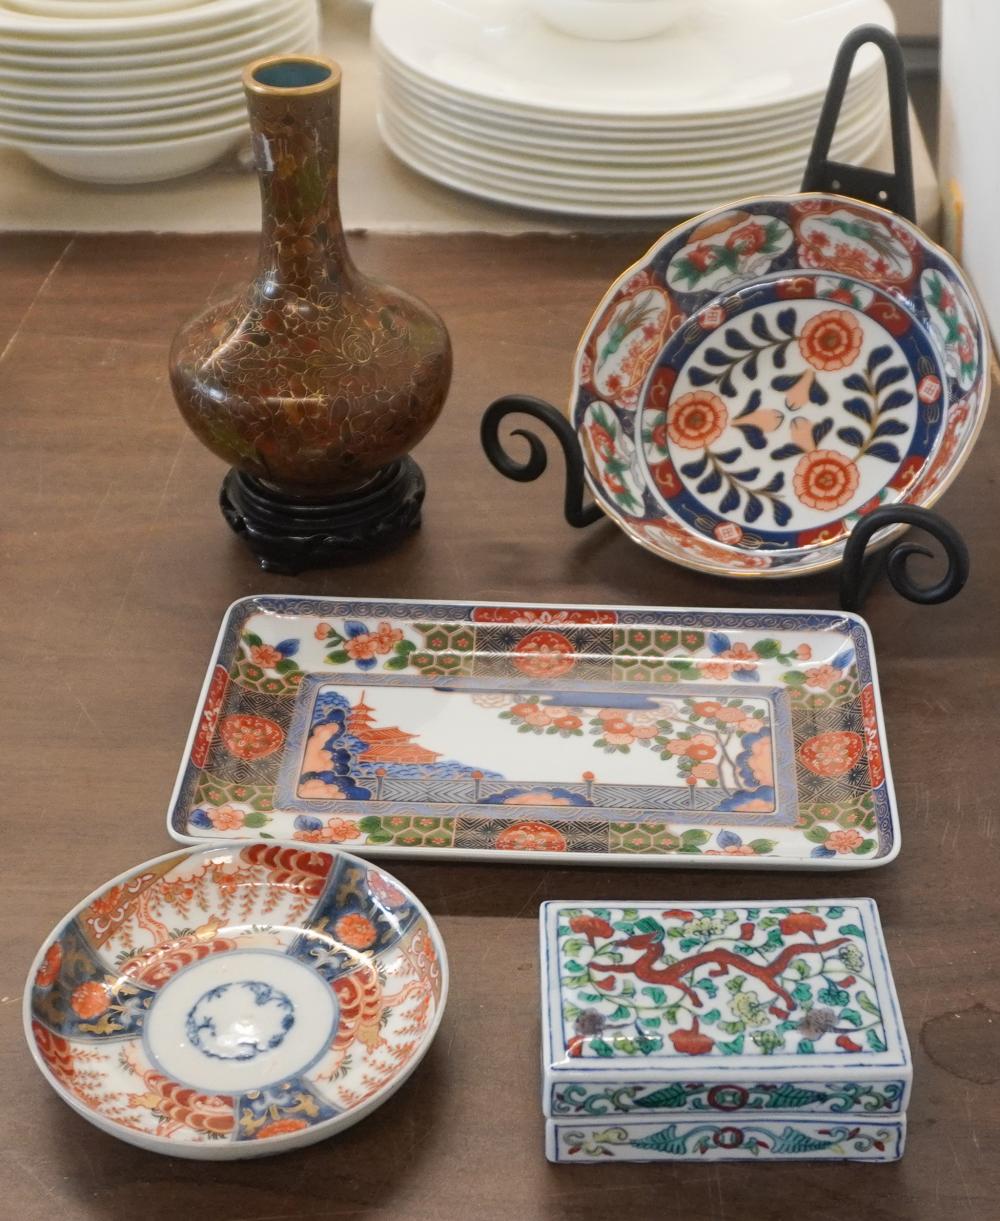 GROUP OF JAPANESE PORCELAIN AND